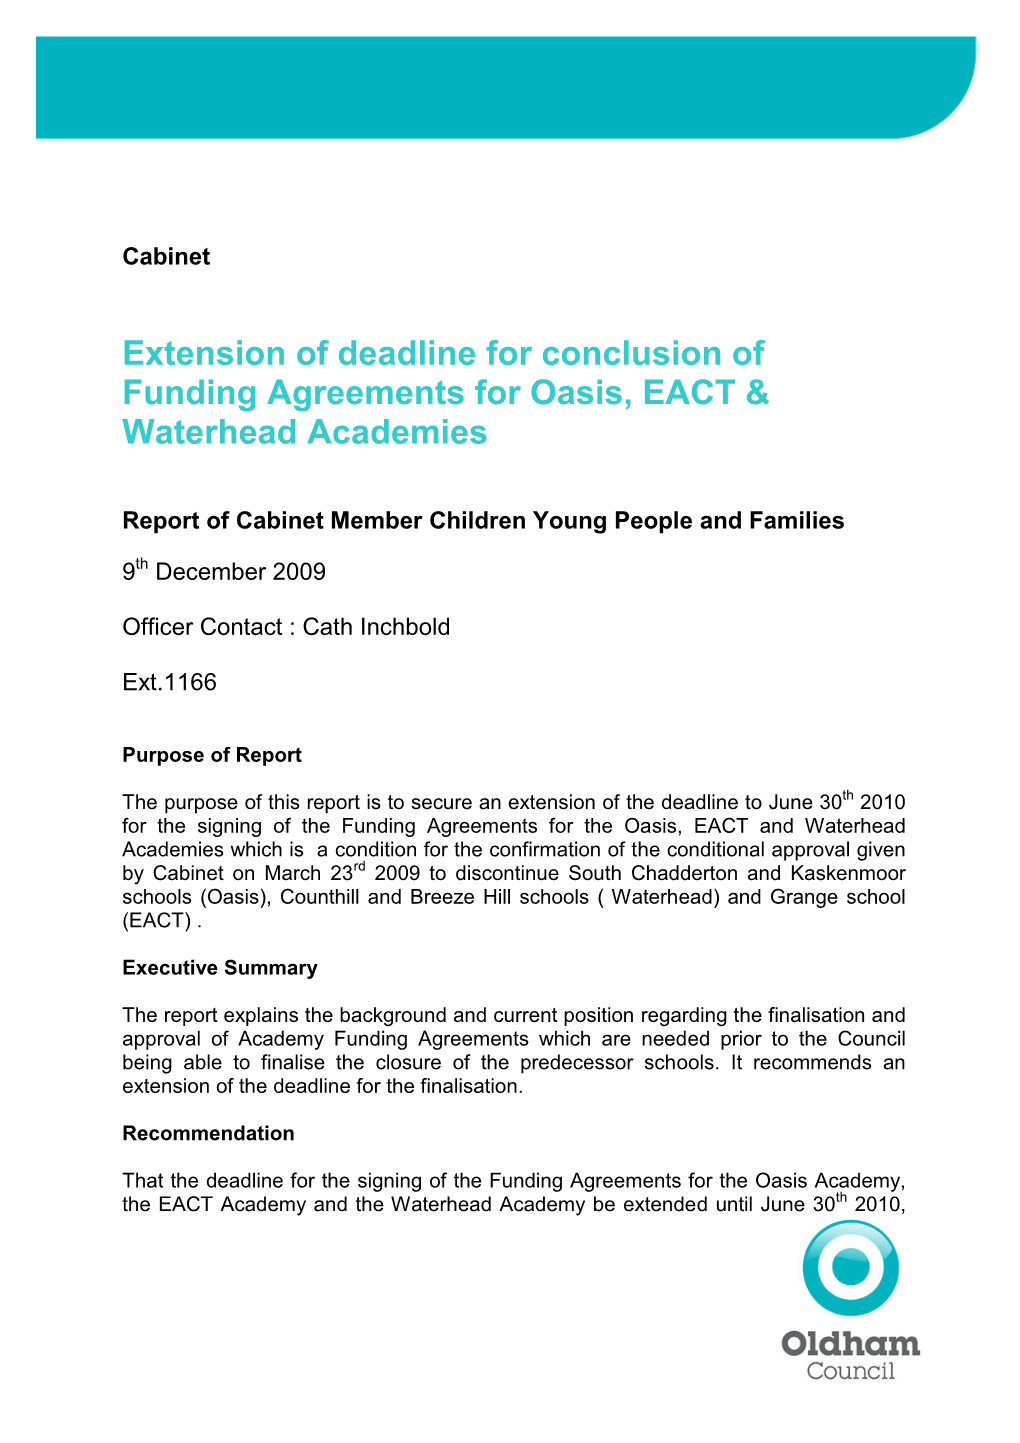 Extension of Deadline for Conclusion of Funding Agreements for Oasis, EACT & Waterhead Academies